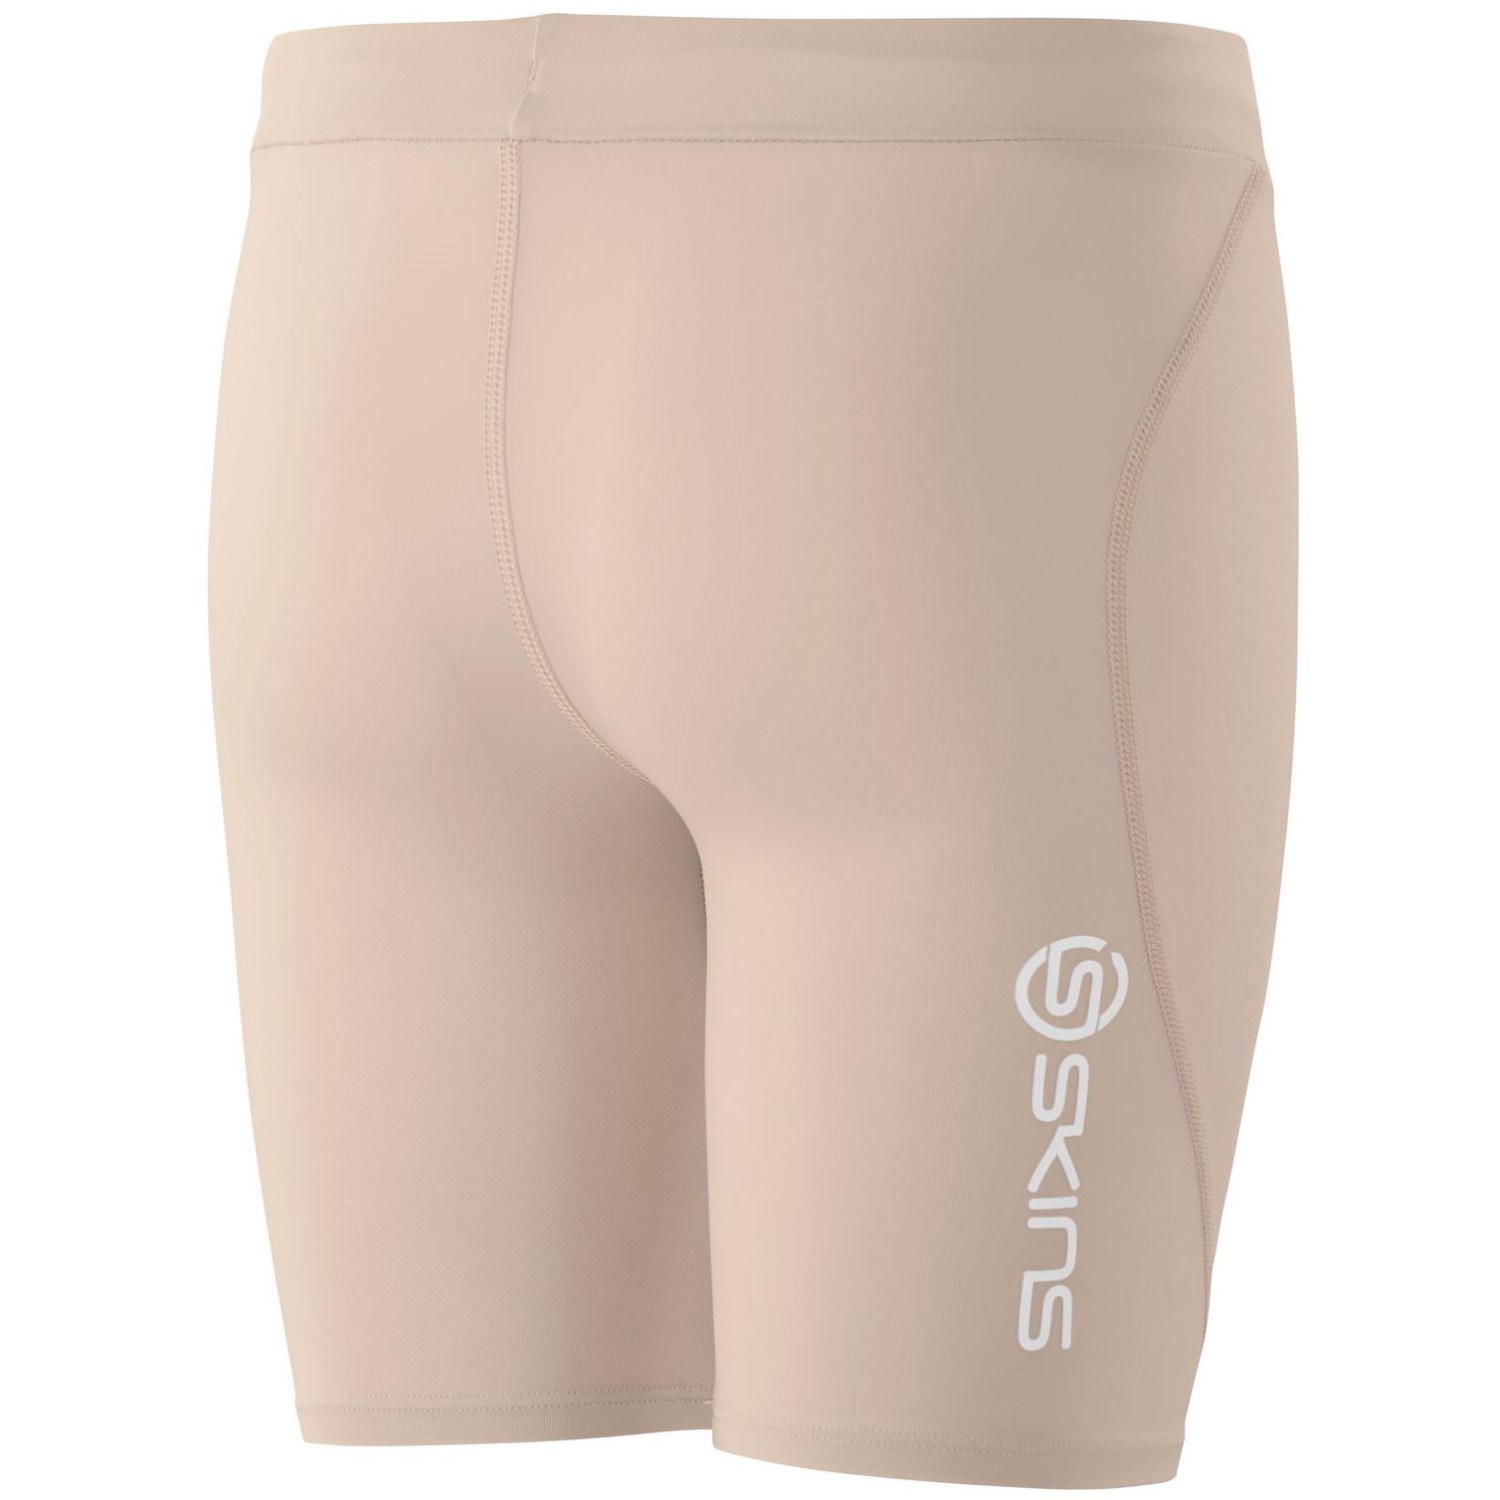 Skins Series-1 Youth Kids Compression Half Tights - Red